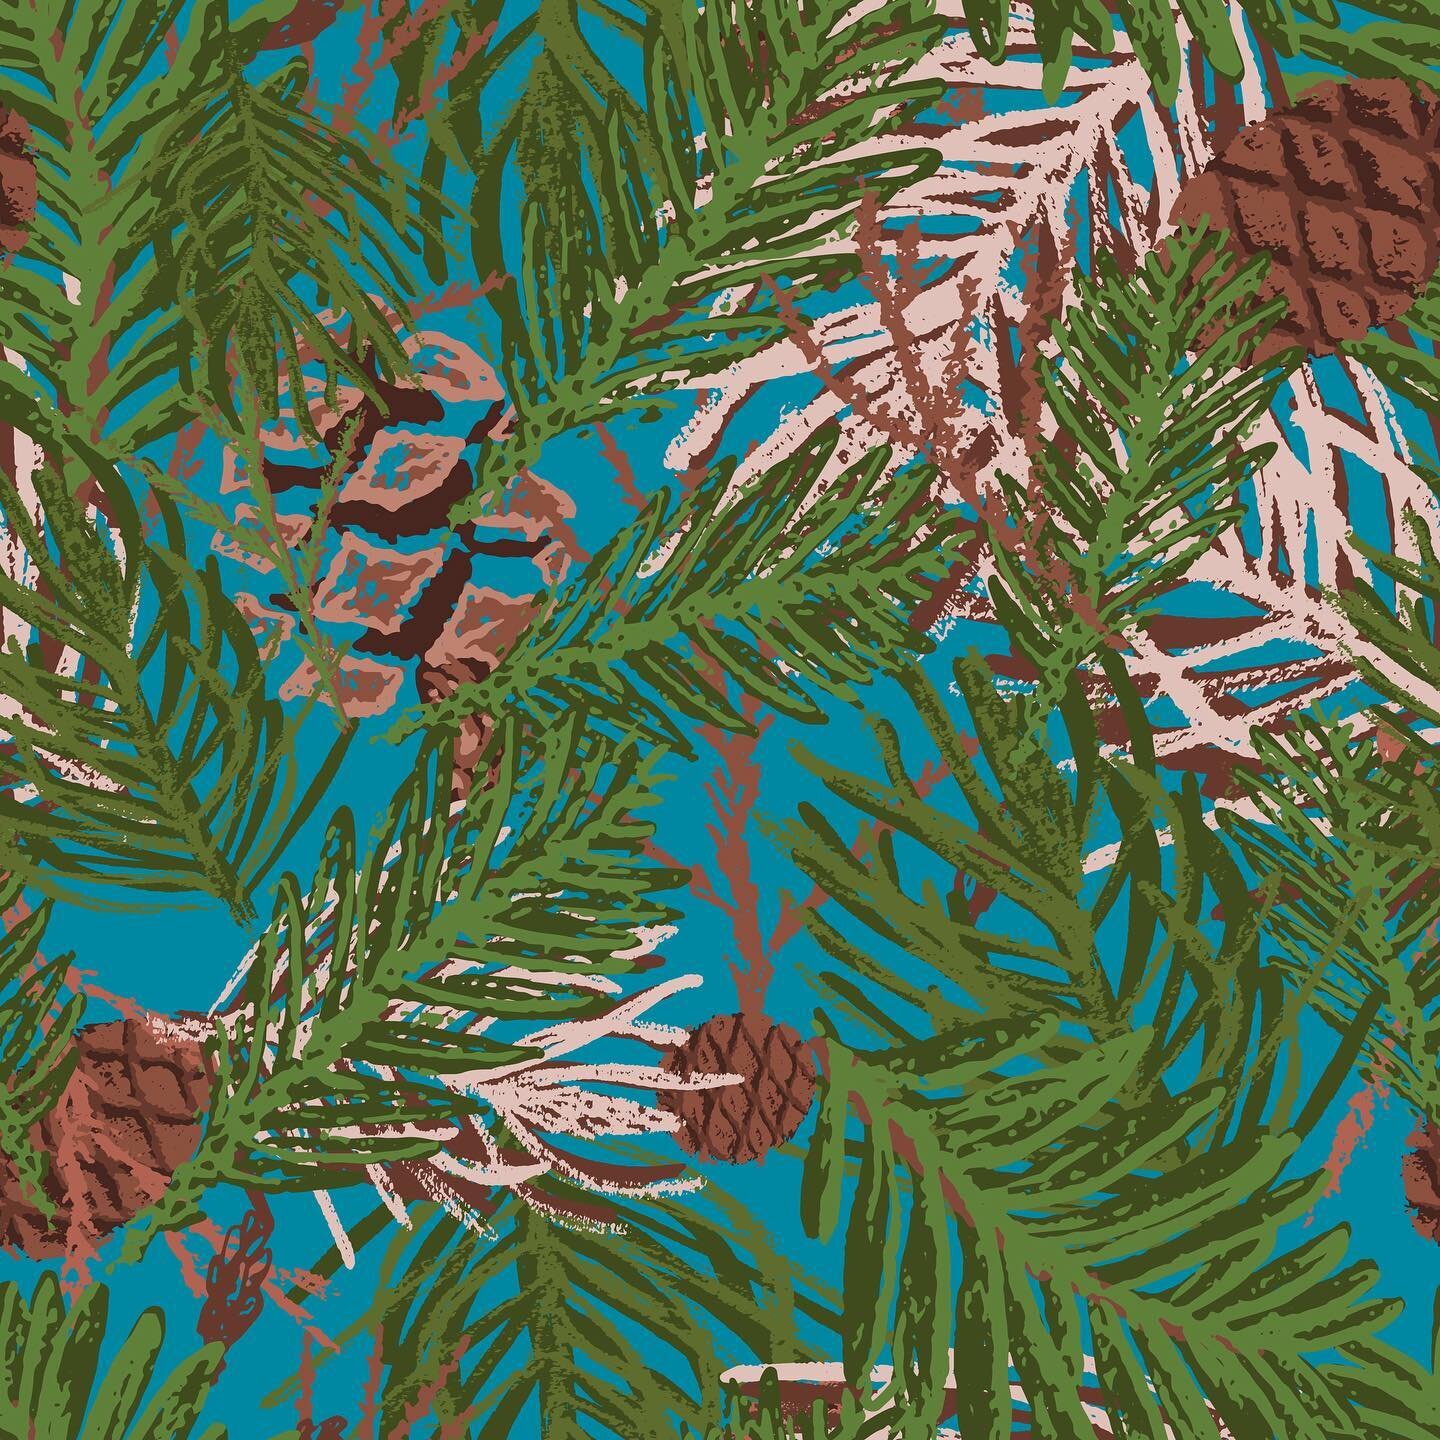 The pattern I created for the new challenge @Spoonflower, &ldquo;Forest Biome&rdquo; is all about the redwood forest and feeling enveloped in that beautiful space, looking up at the trees and the sky. &hellip;. Link to vote for patterns is in the bio